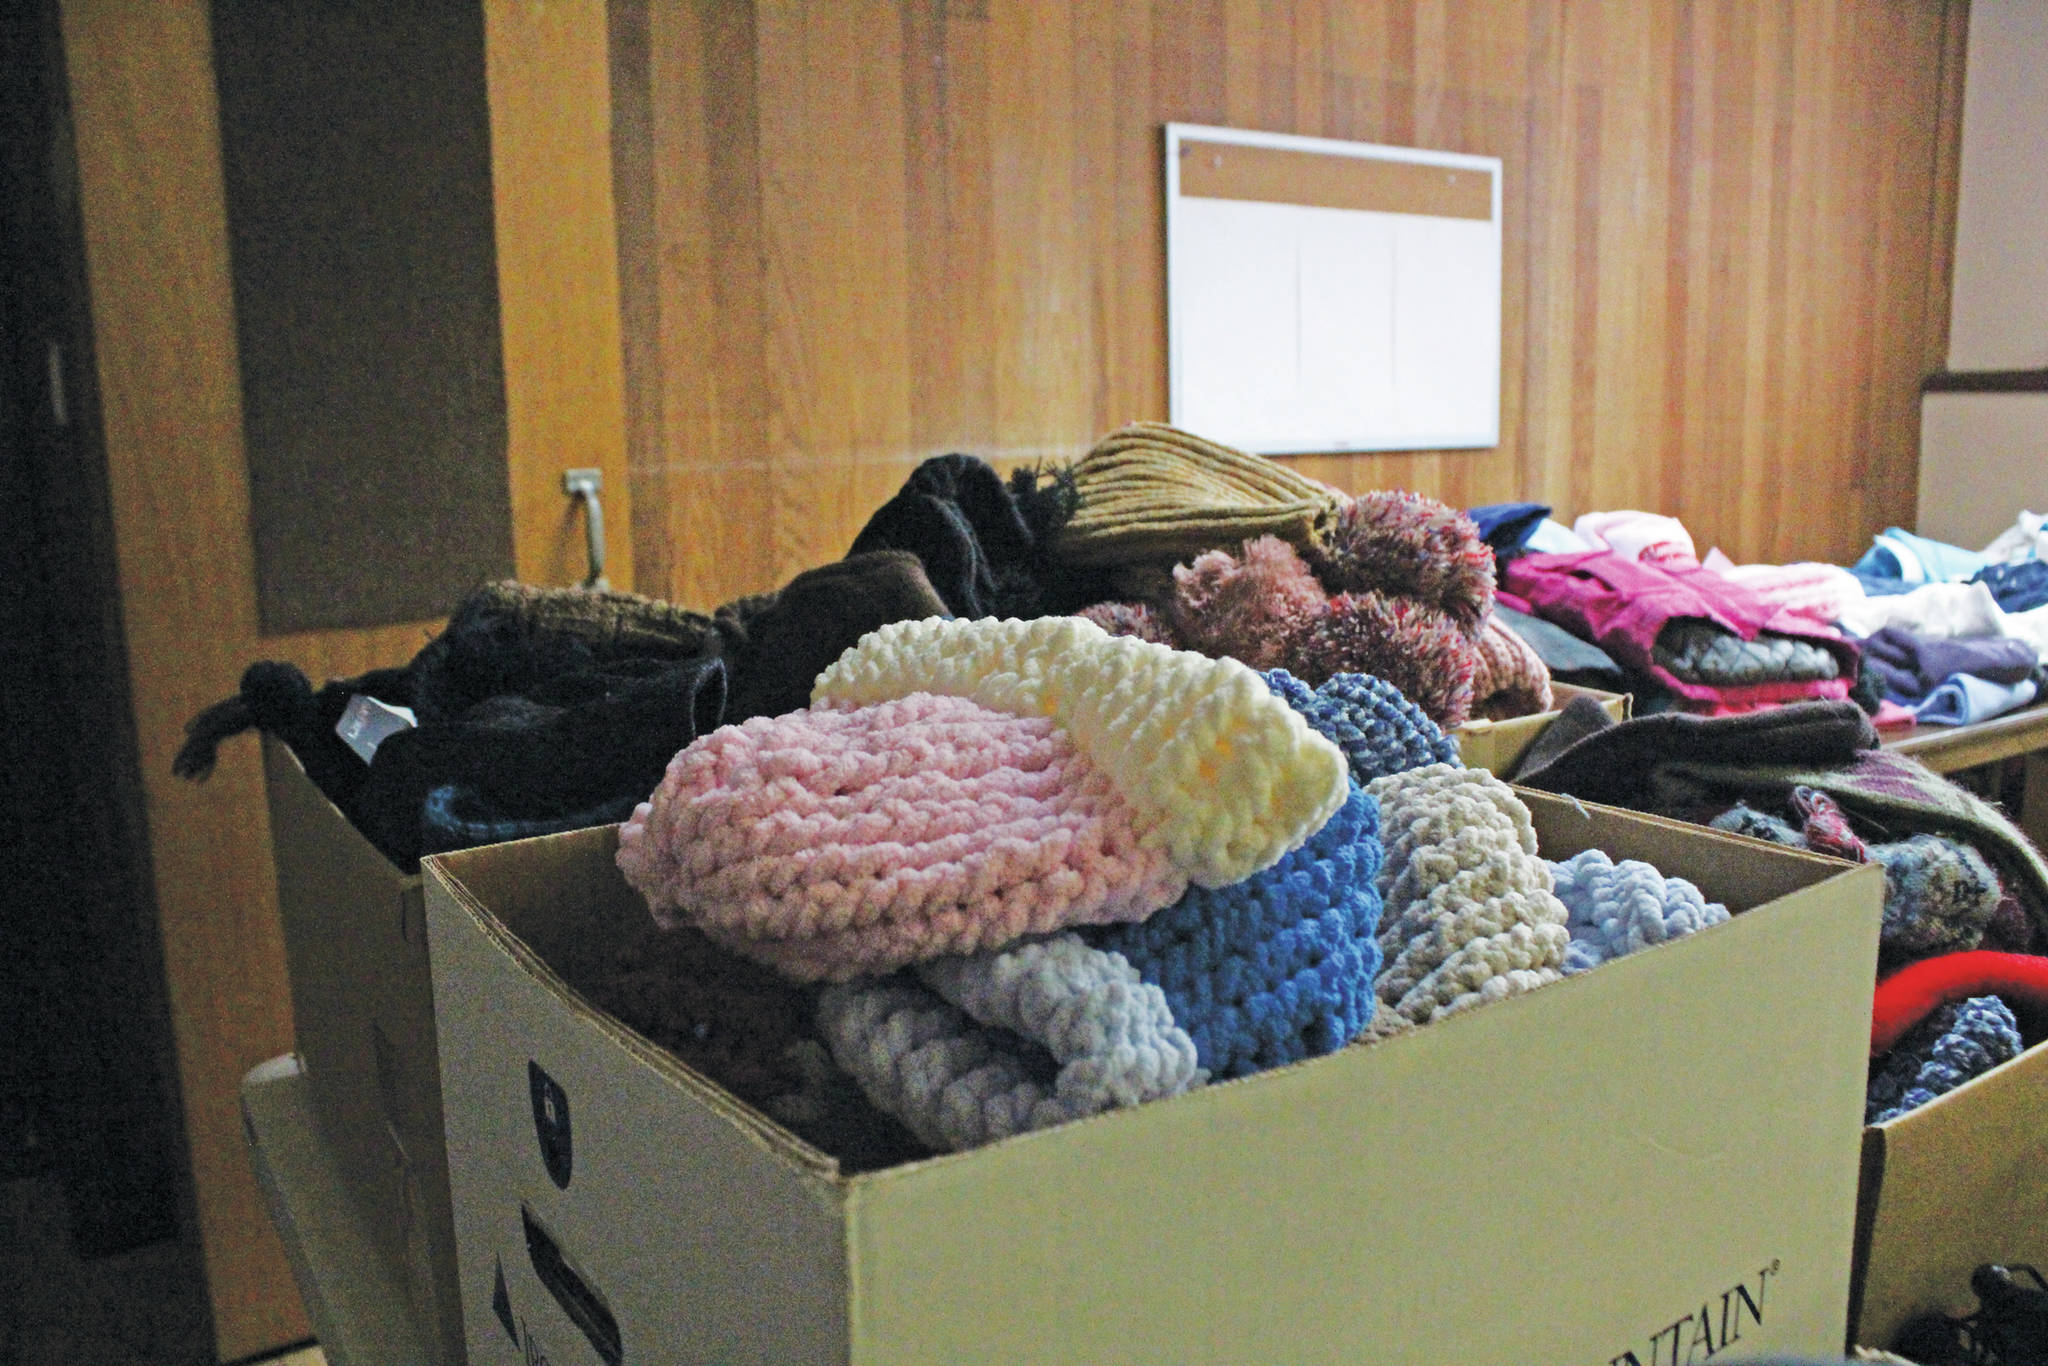 Winter clothing waits to be taken by those experiencing homelessness during Homer’s first time participating in Project Homeless Connect on Jan. 29, 2020 at Homer United Methodist Church in Homer, Alaska. (Photo by Megan Pacer/Homer News)